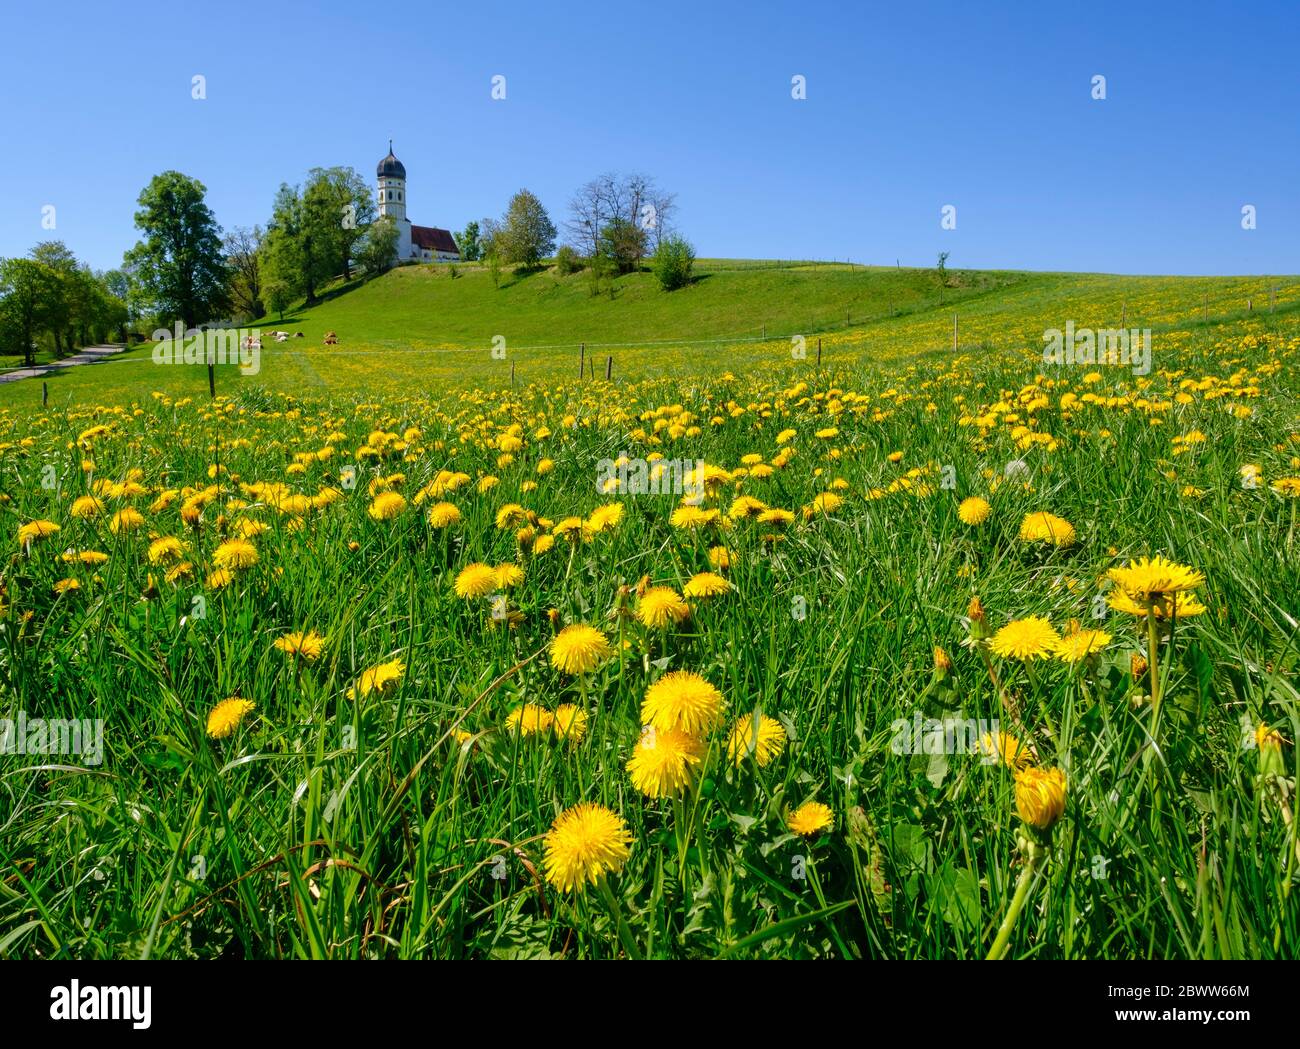 Germany, Bavaria, Munsing, Dandelions blooming in springtime meadow with Church of Assumption of Virgin Mary in background Stock Photo